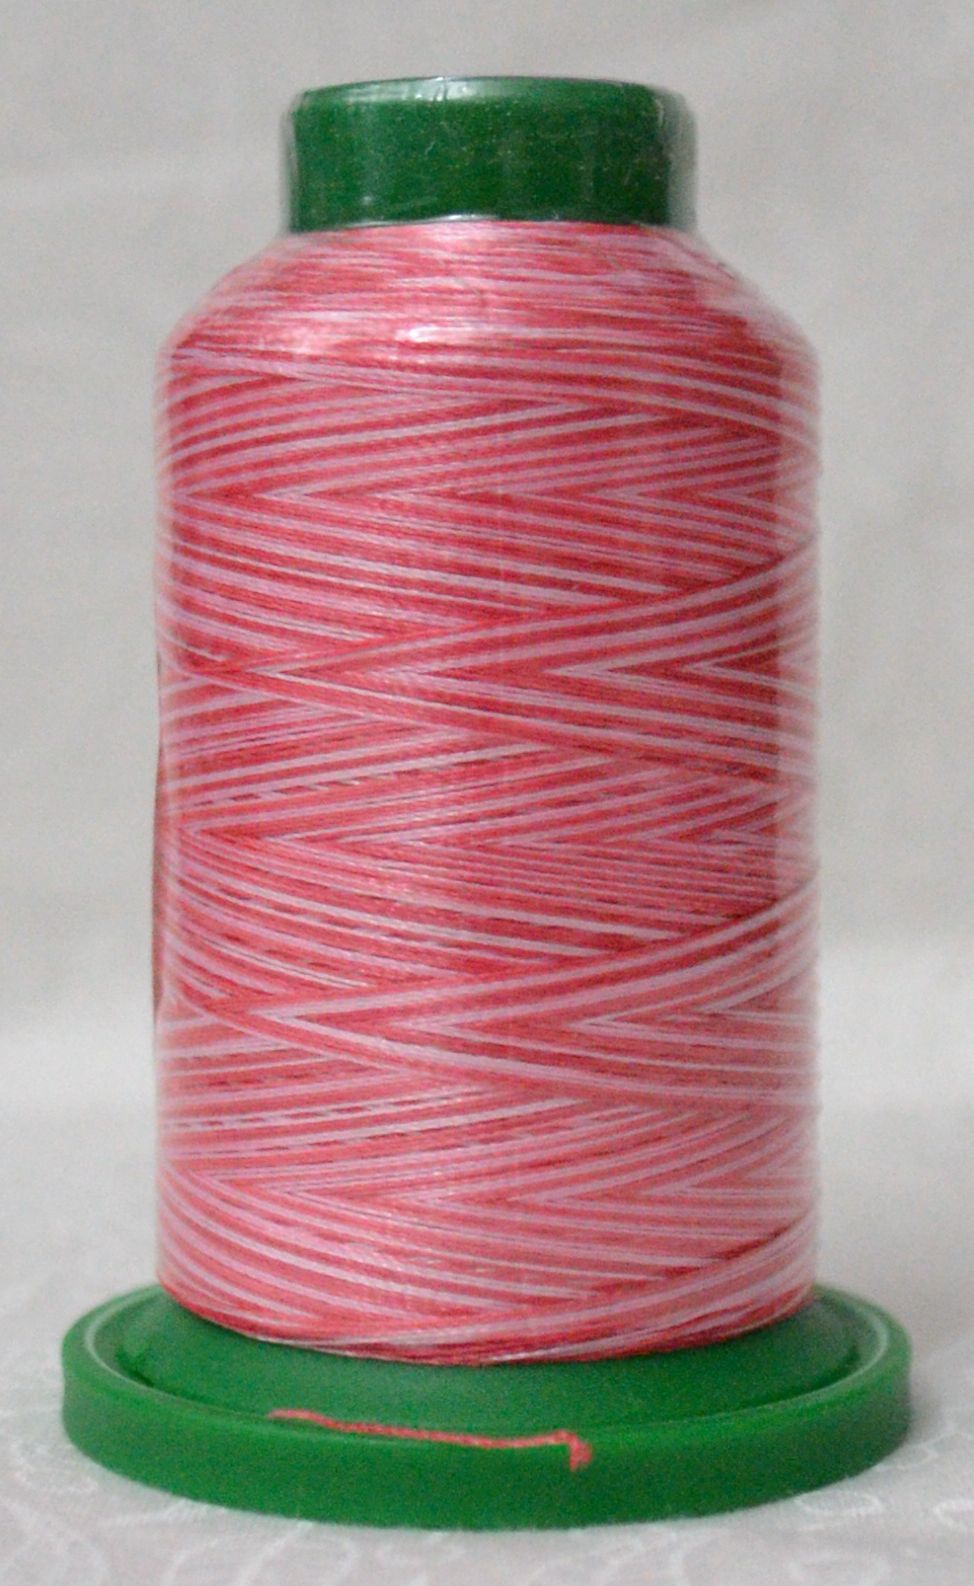 Isacord Variegated Embroidery Thread, 9918 Old Glory